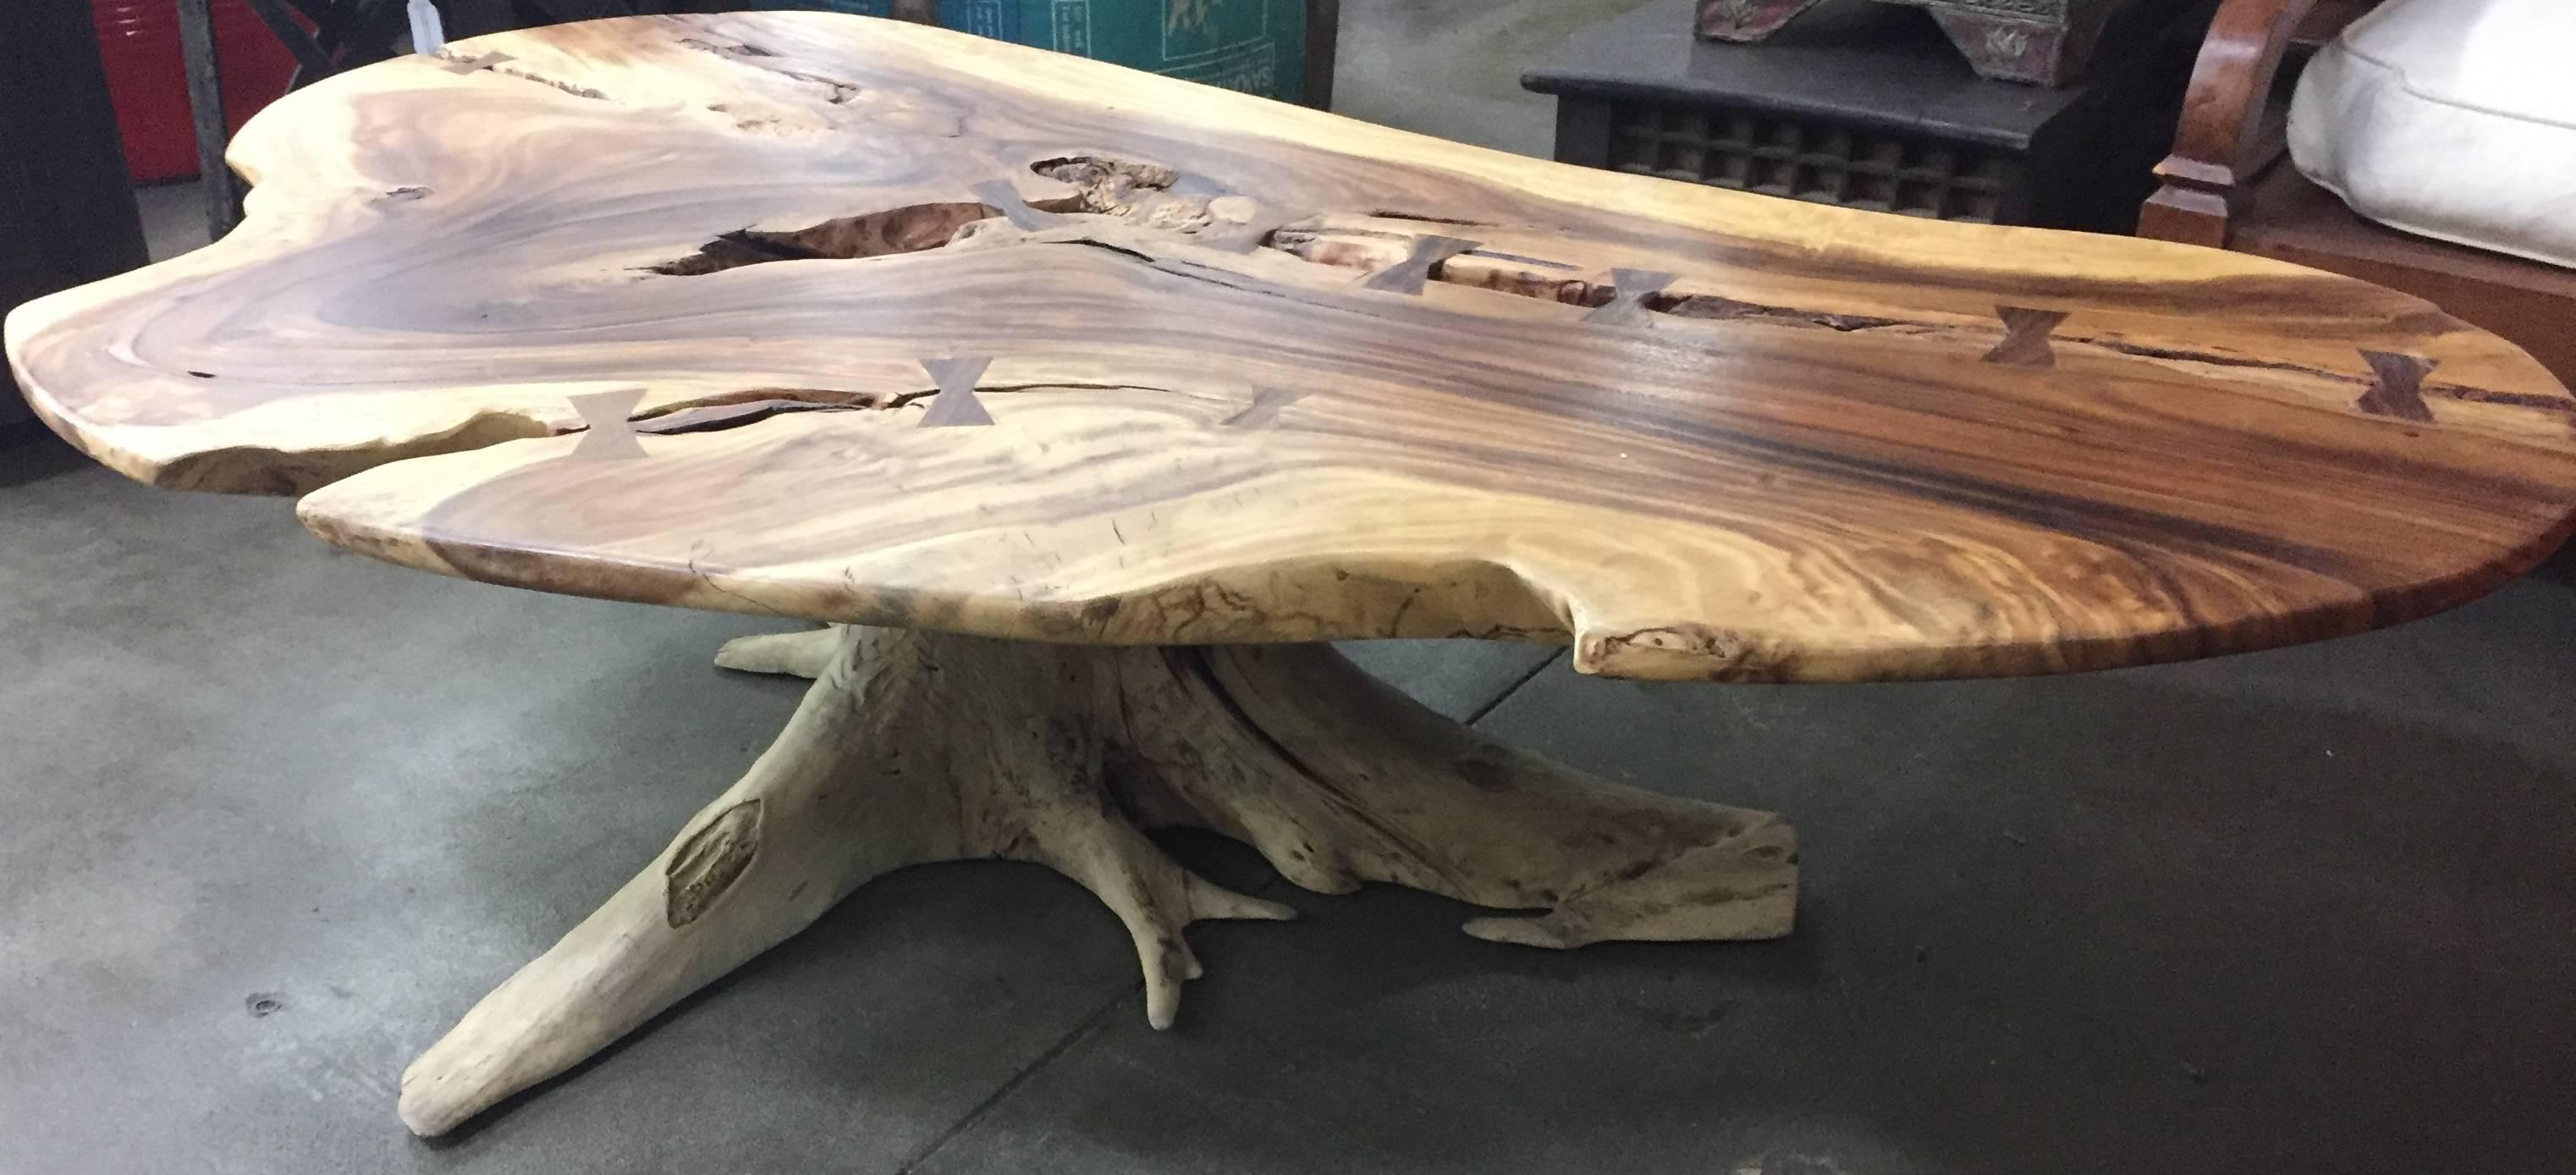 Organic modern coffee table with tree root base.